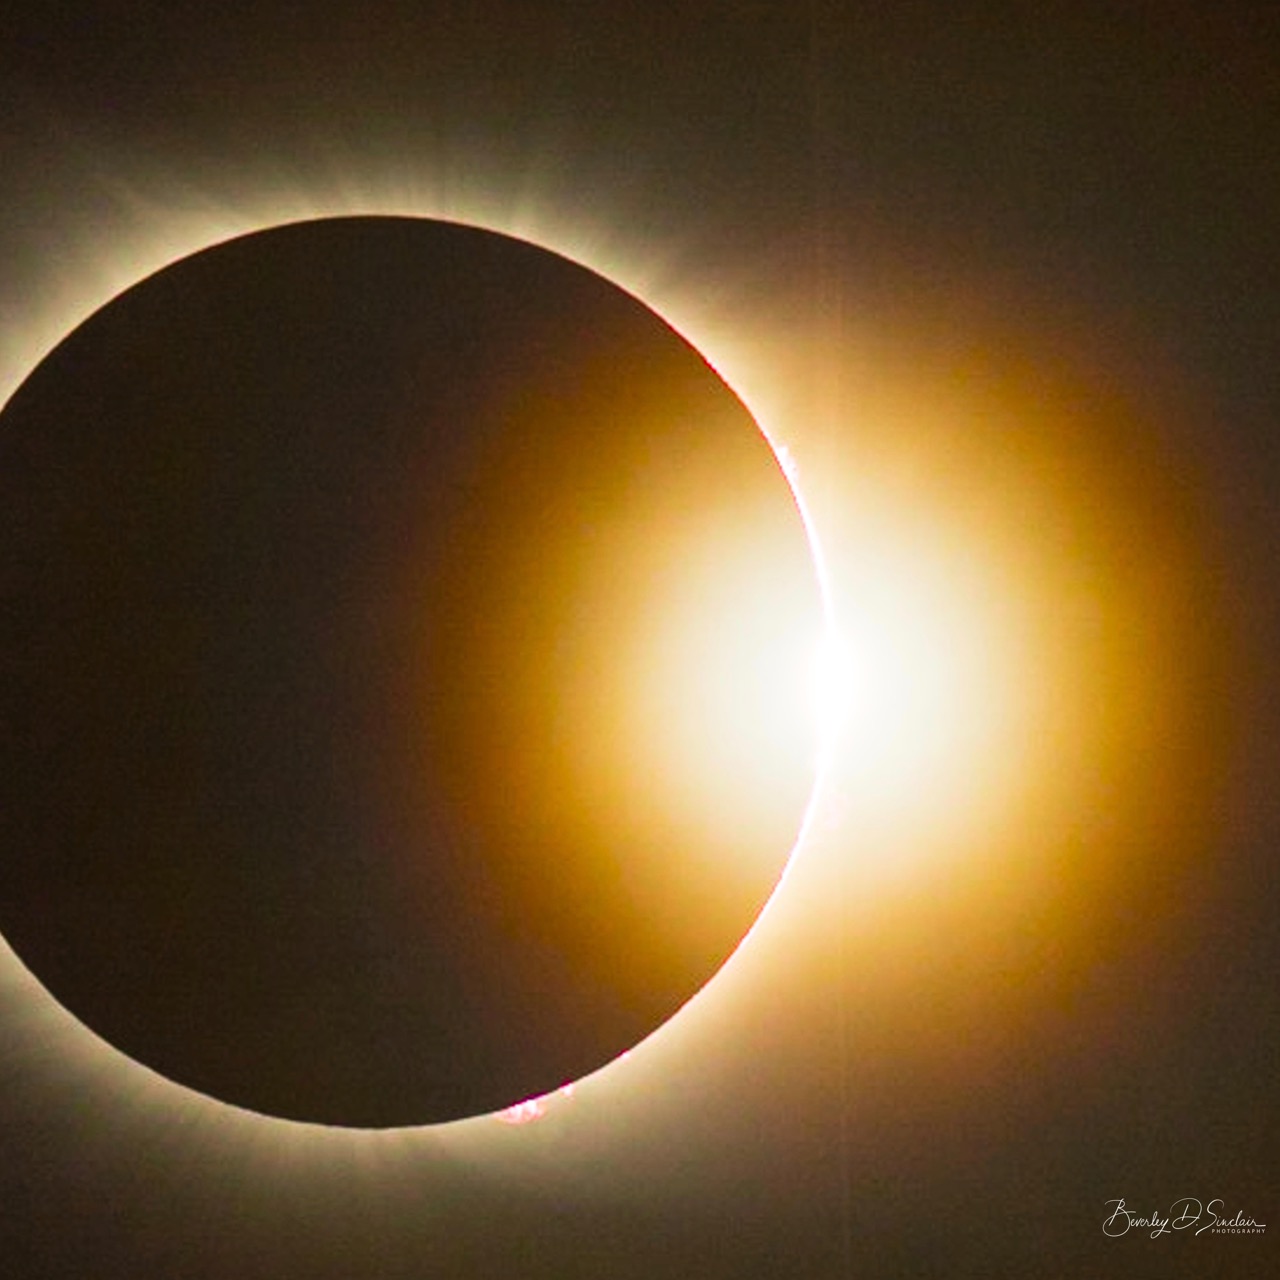 A totally eclipsed sun with a bright light emerging on one side: the diamond ring effect.